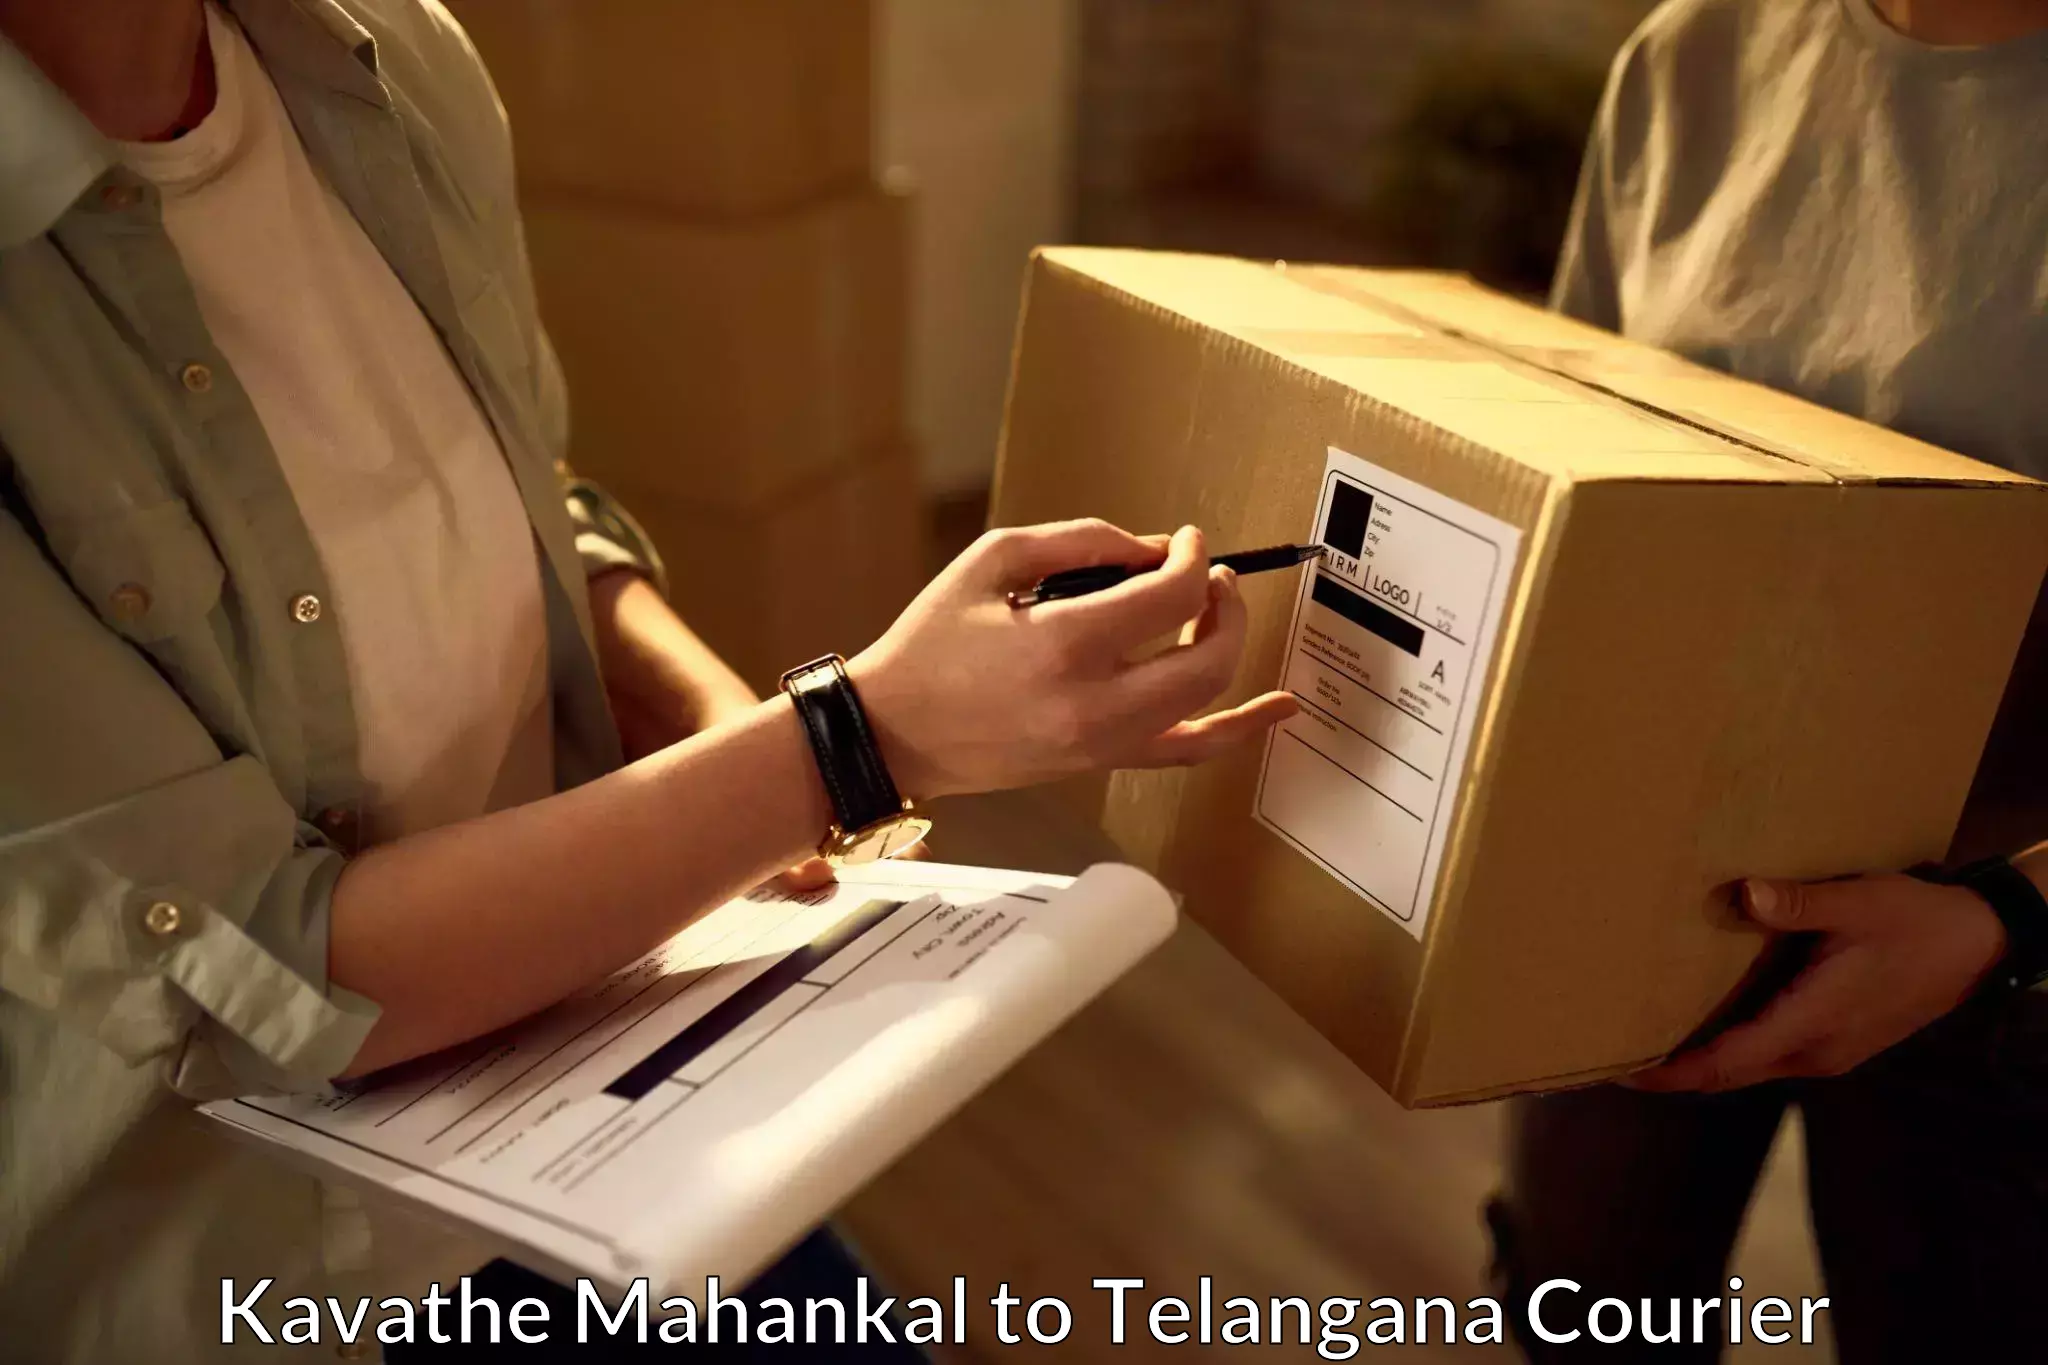 Courier service booking Kavathe Mahankal to Bachupally